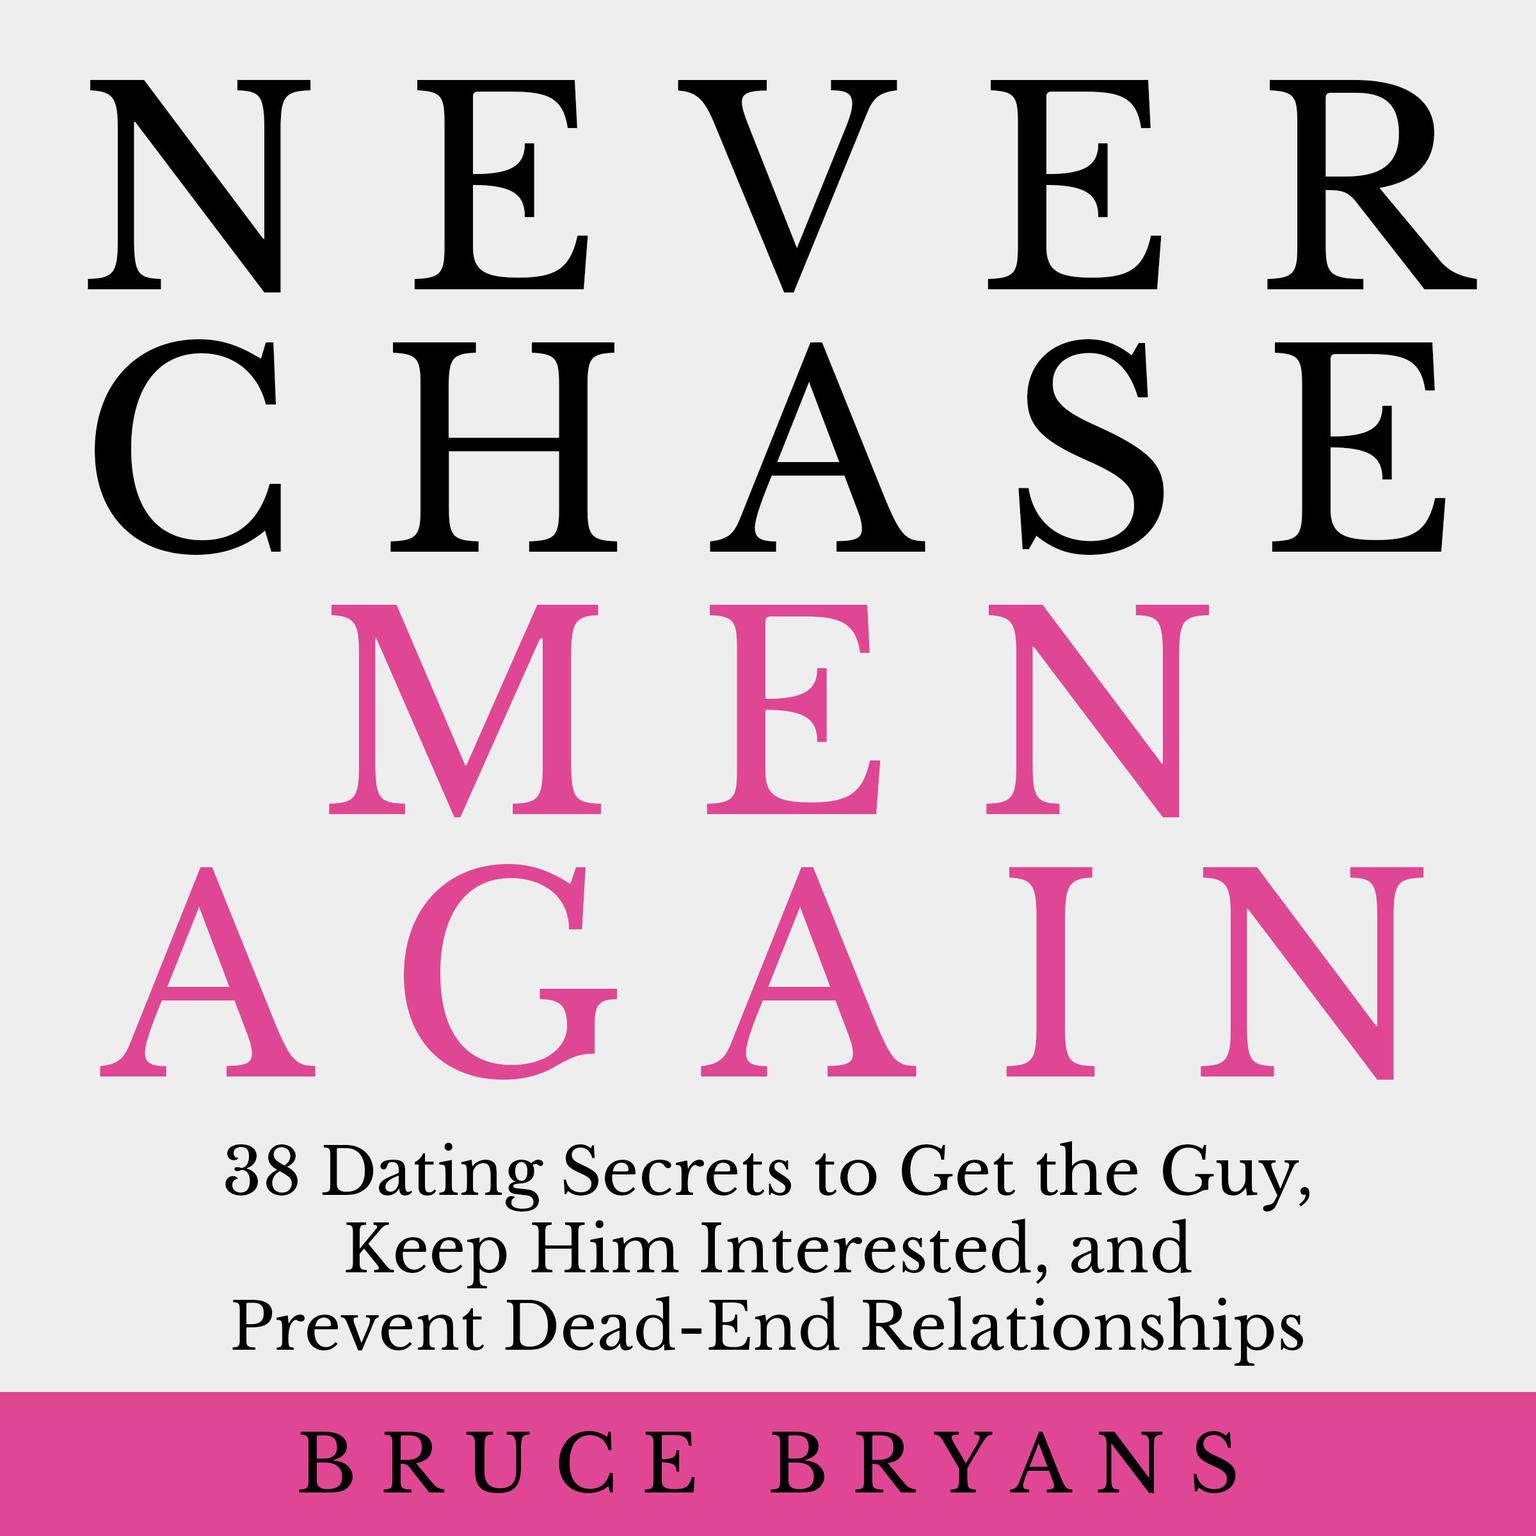 Never Chase Men Again: 38 Dating Secrets to Get the Guy, Keep Him Interested, and Prevent Dead-End Relationships Audiobook, by Bruce Bryans